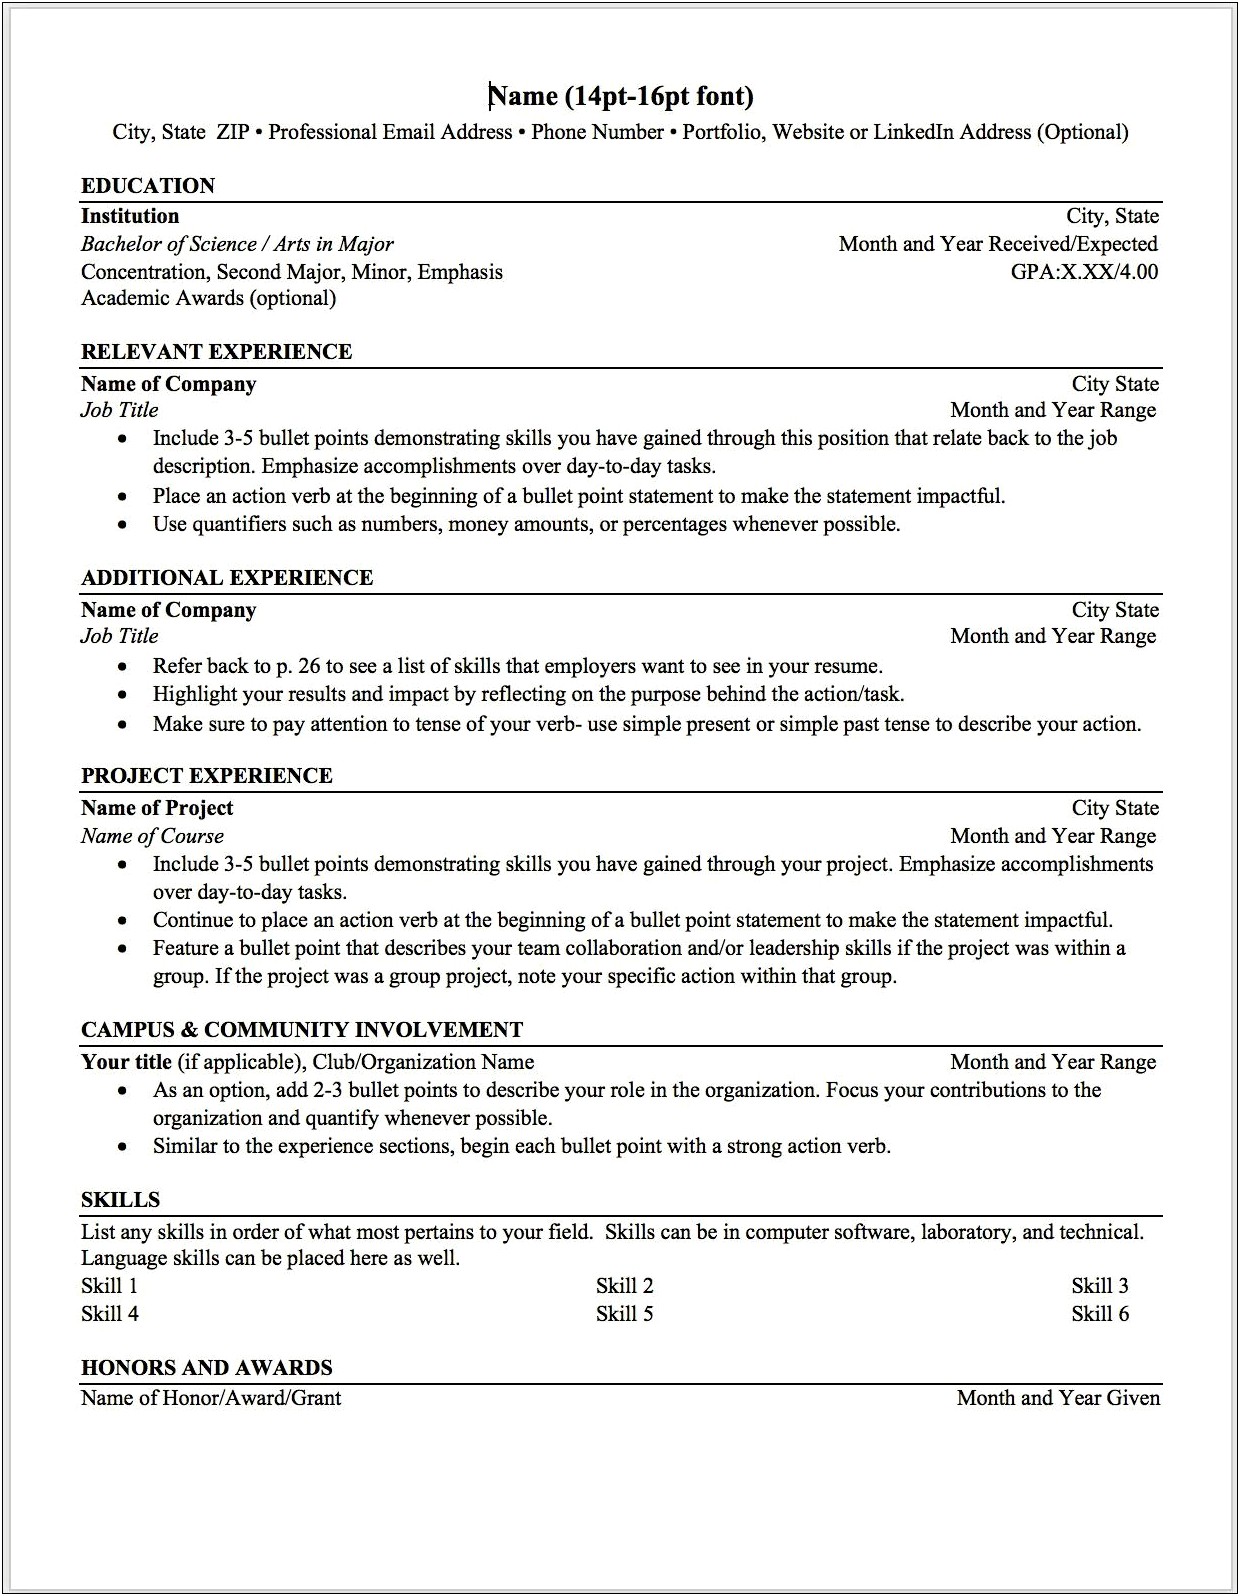 Resume Past Work Experience In Past Tense